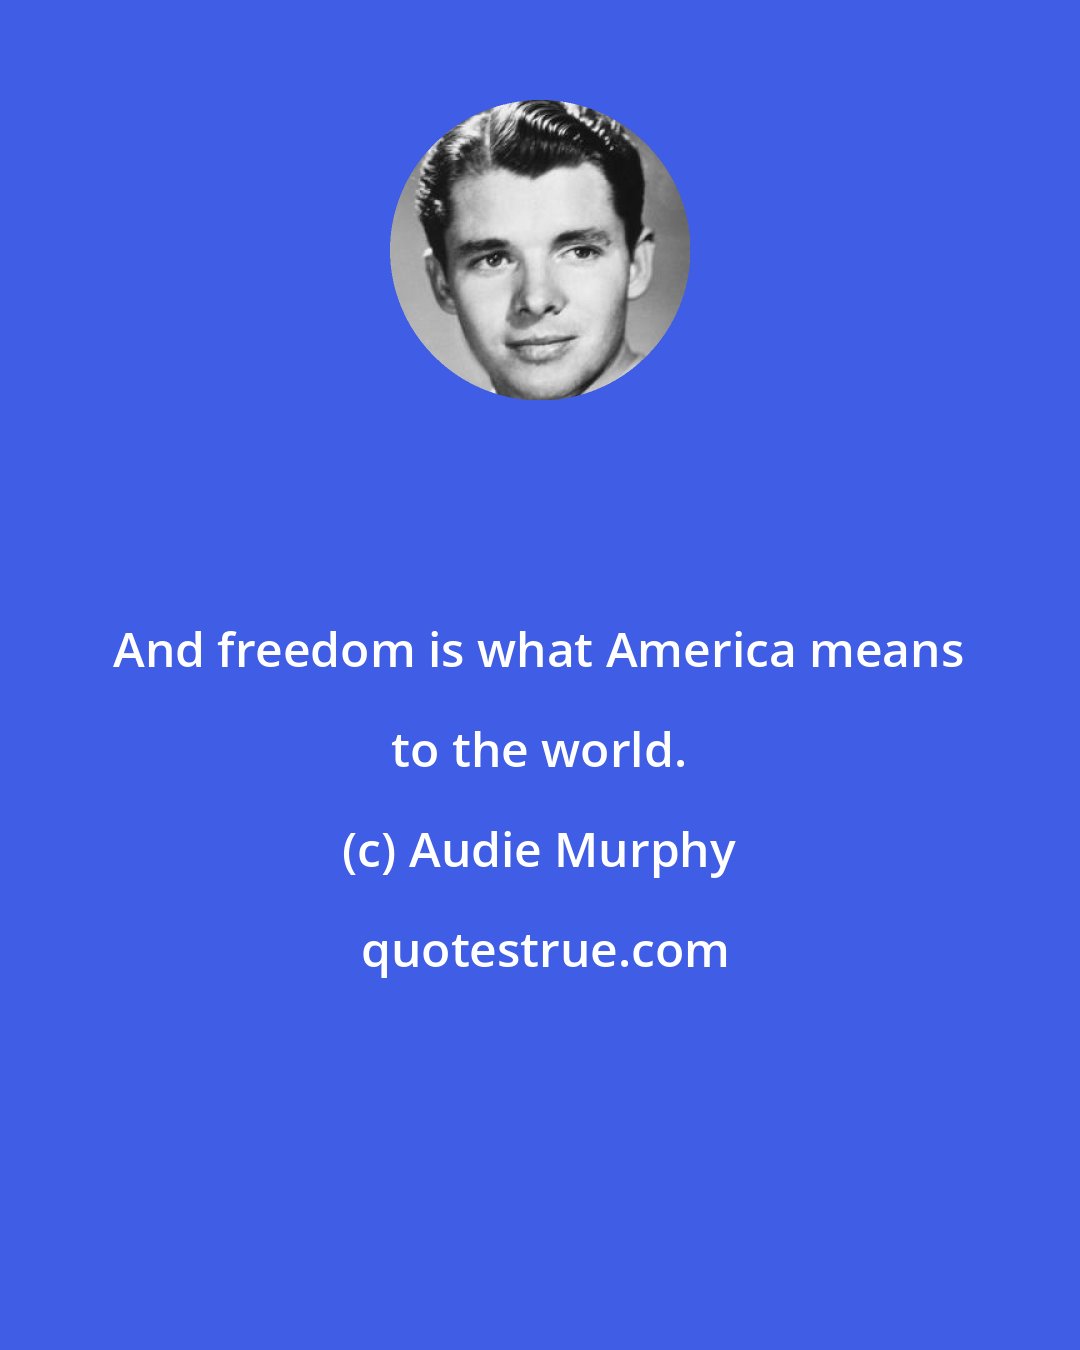 Audie Murphy: And freedom is what America means to the world.